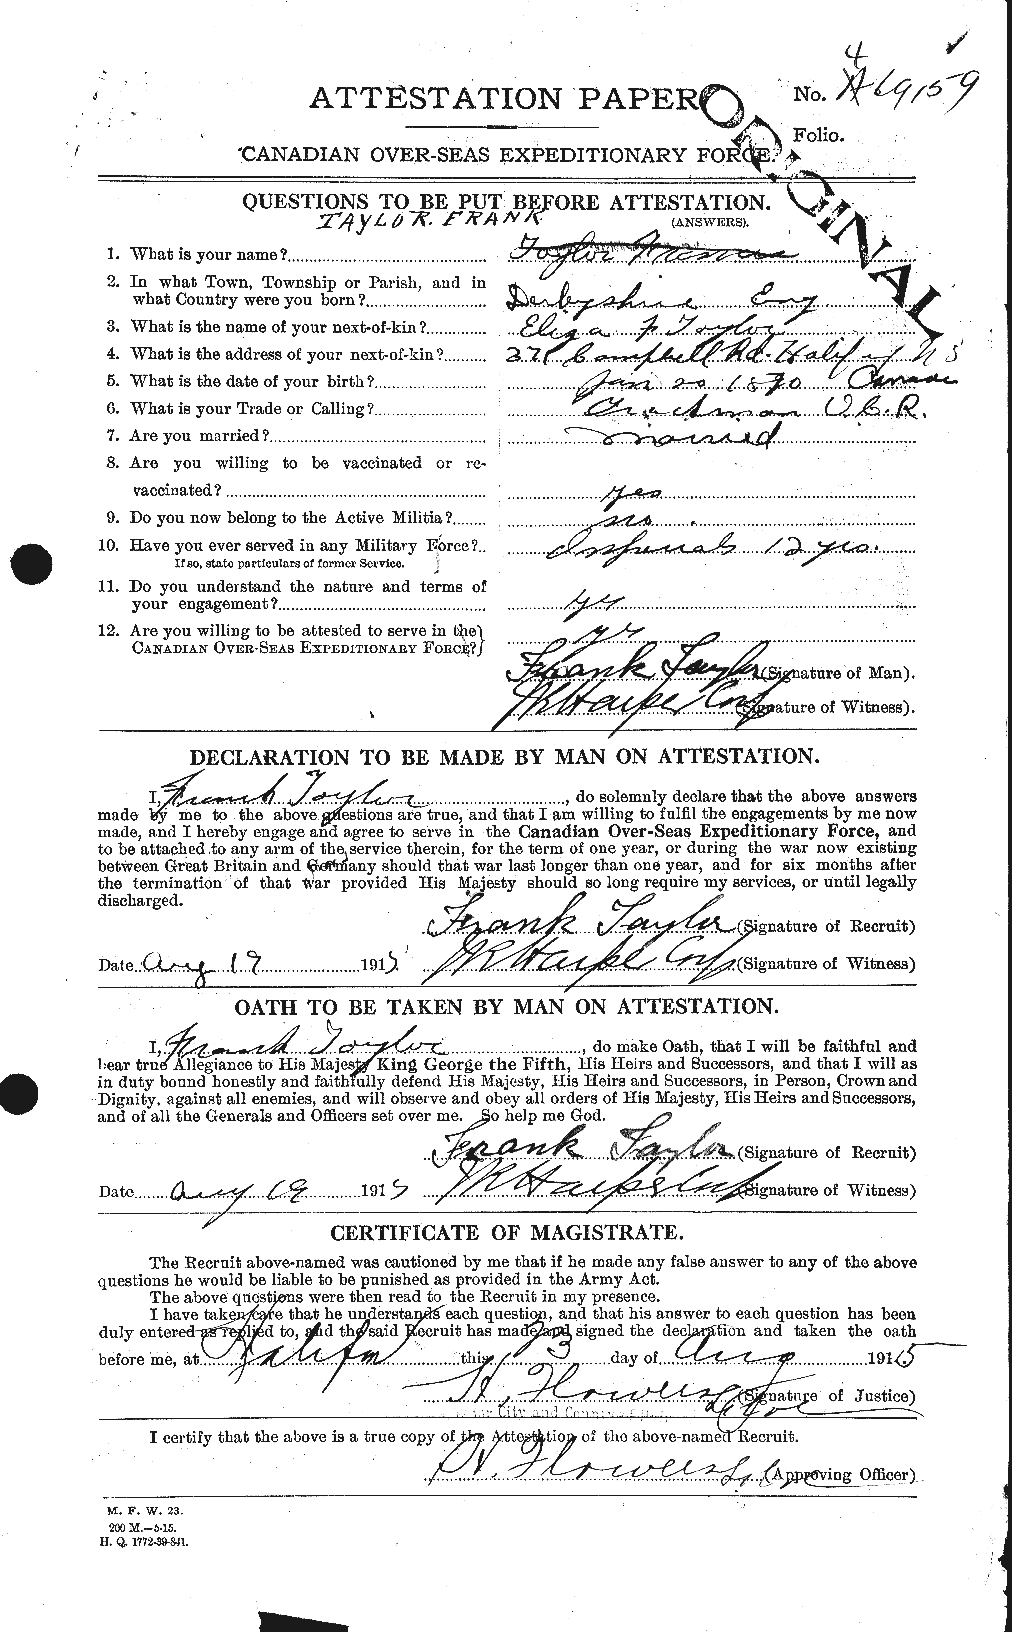 Personnel Records of the First World War - CEF 625714a